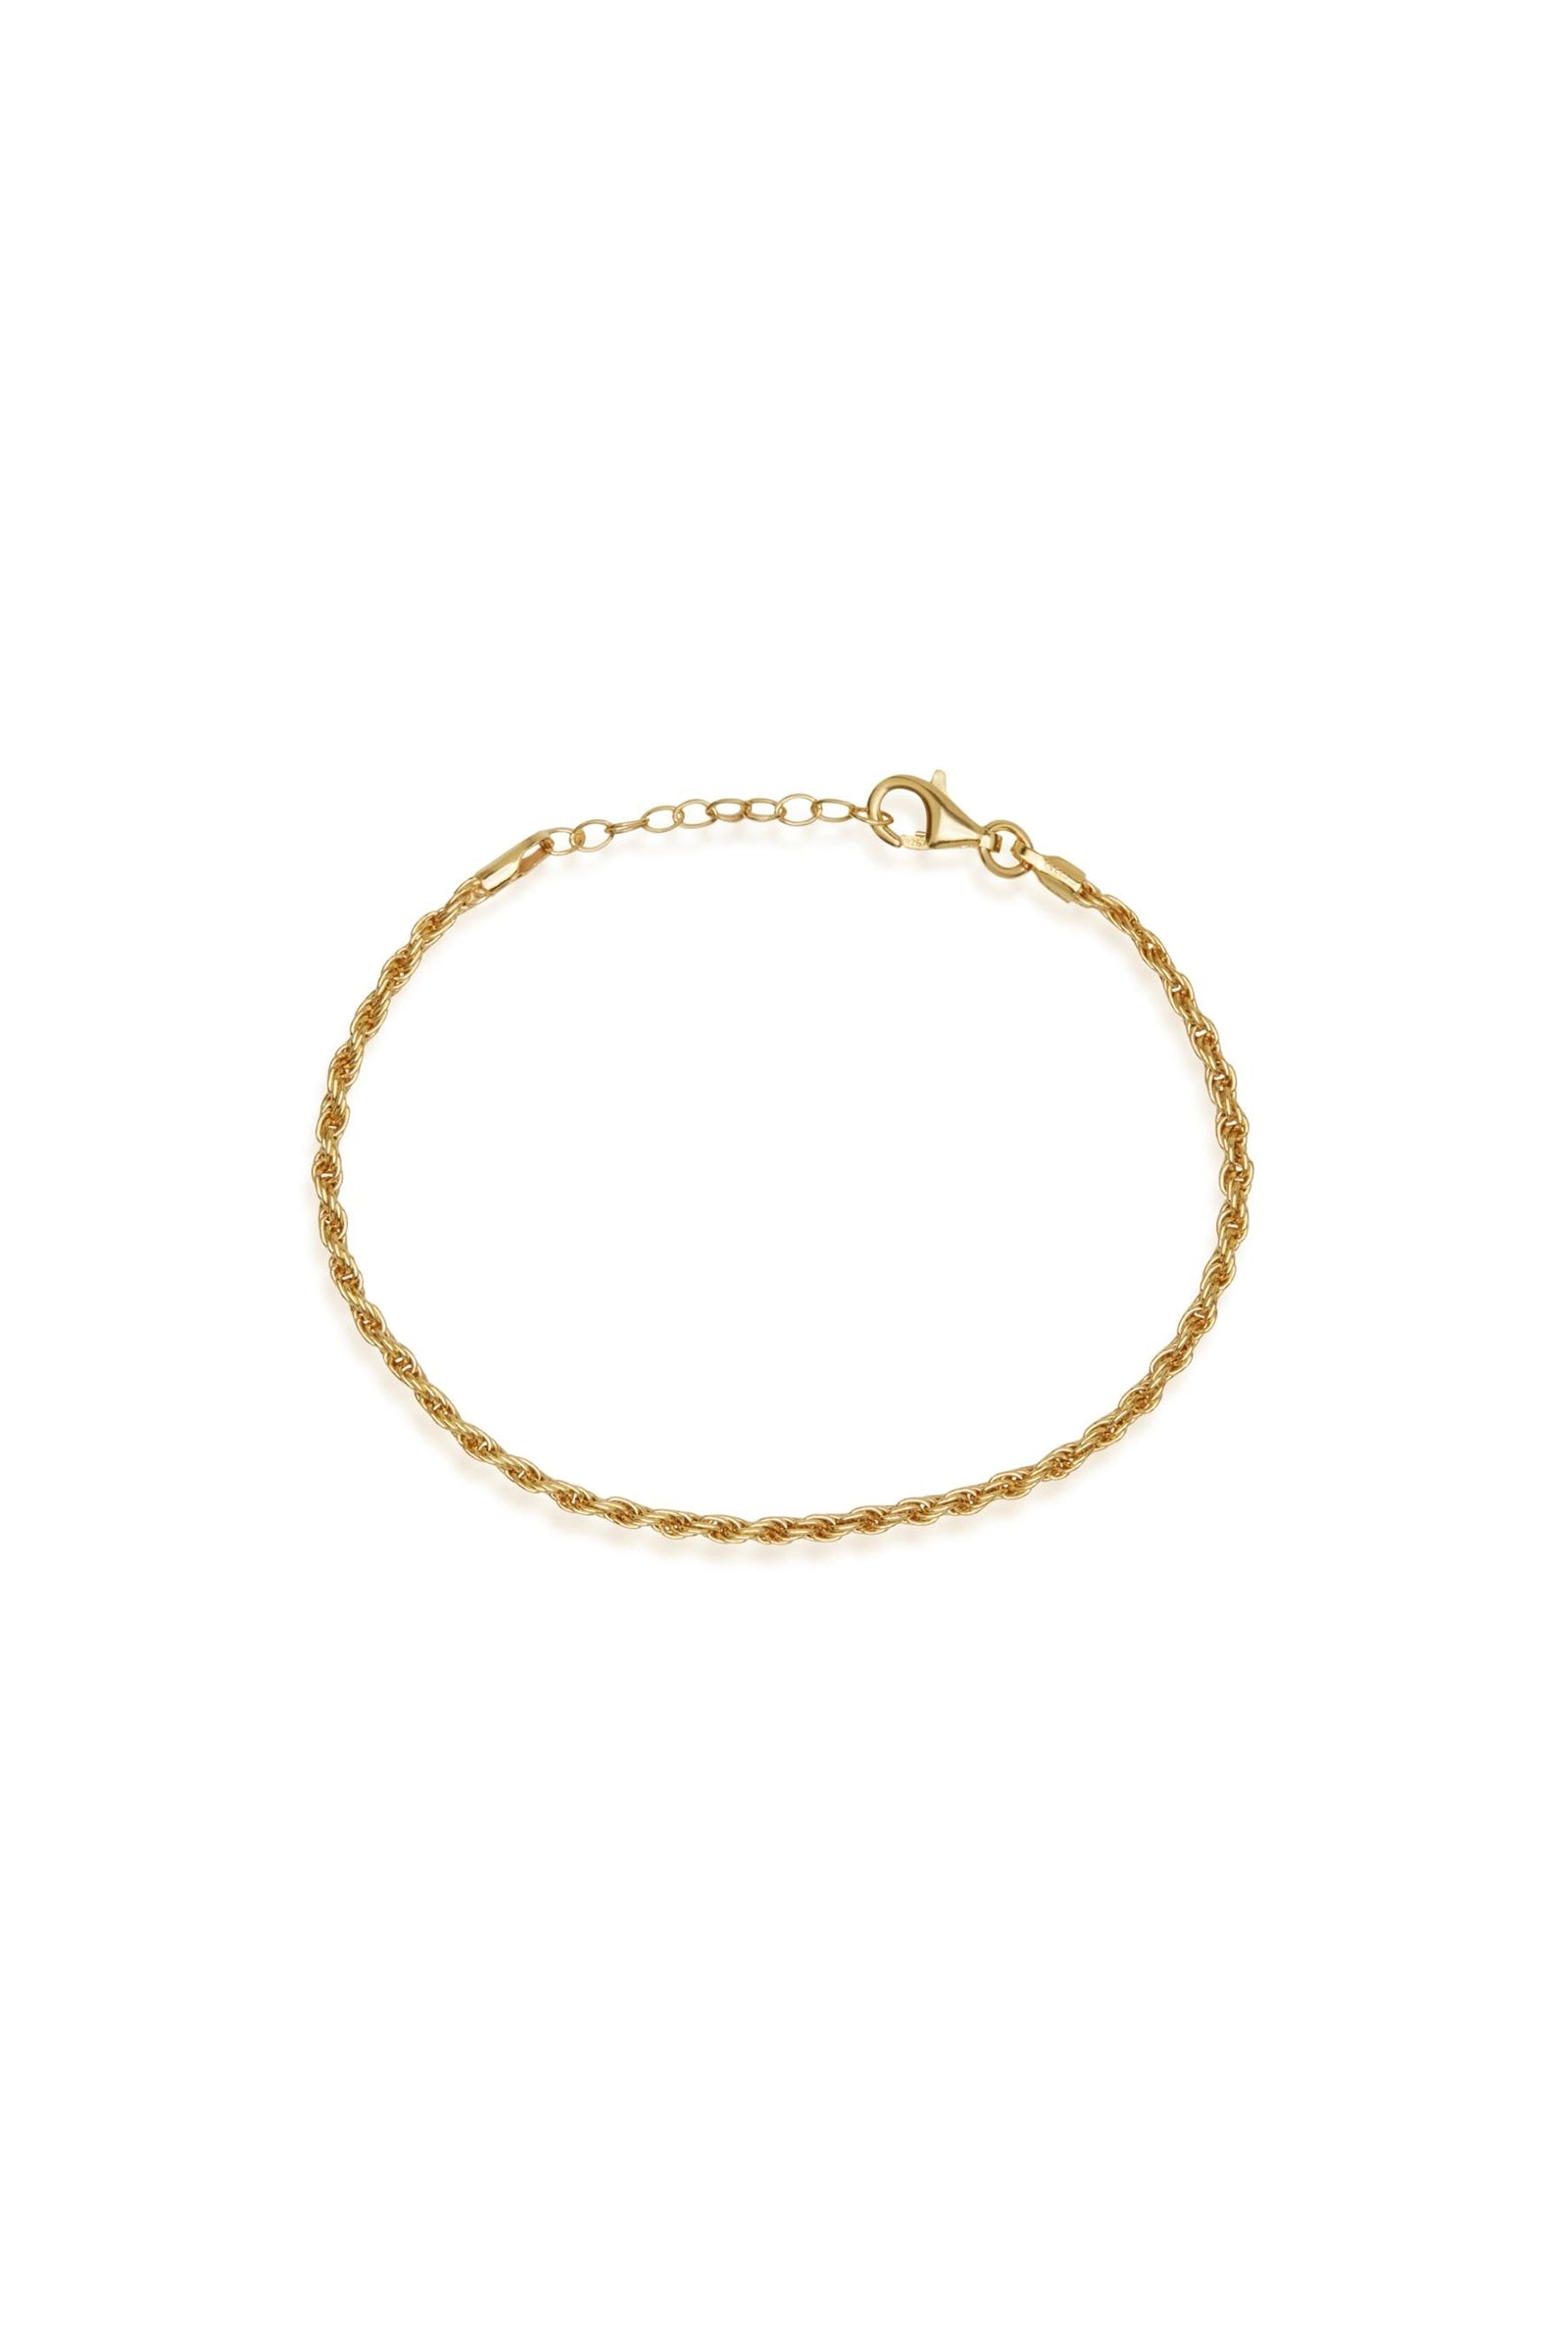 Nude Lucy Valencia Bracelet in Gold